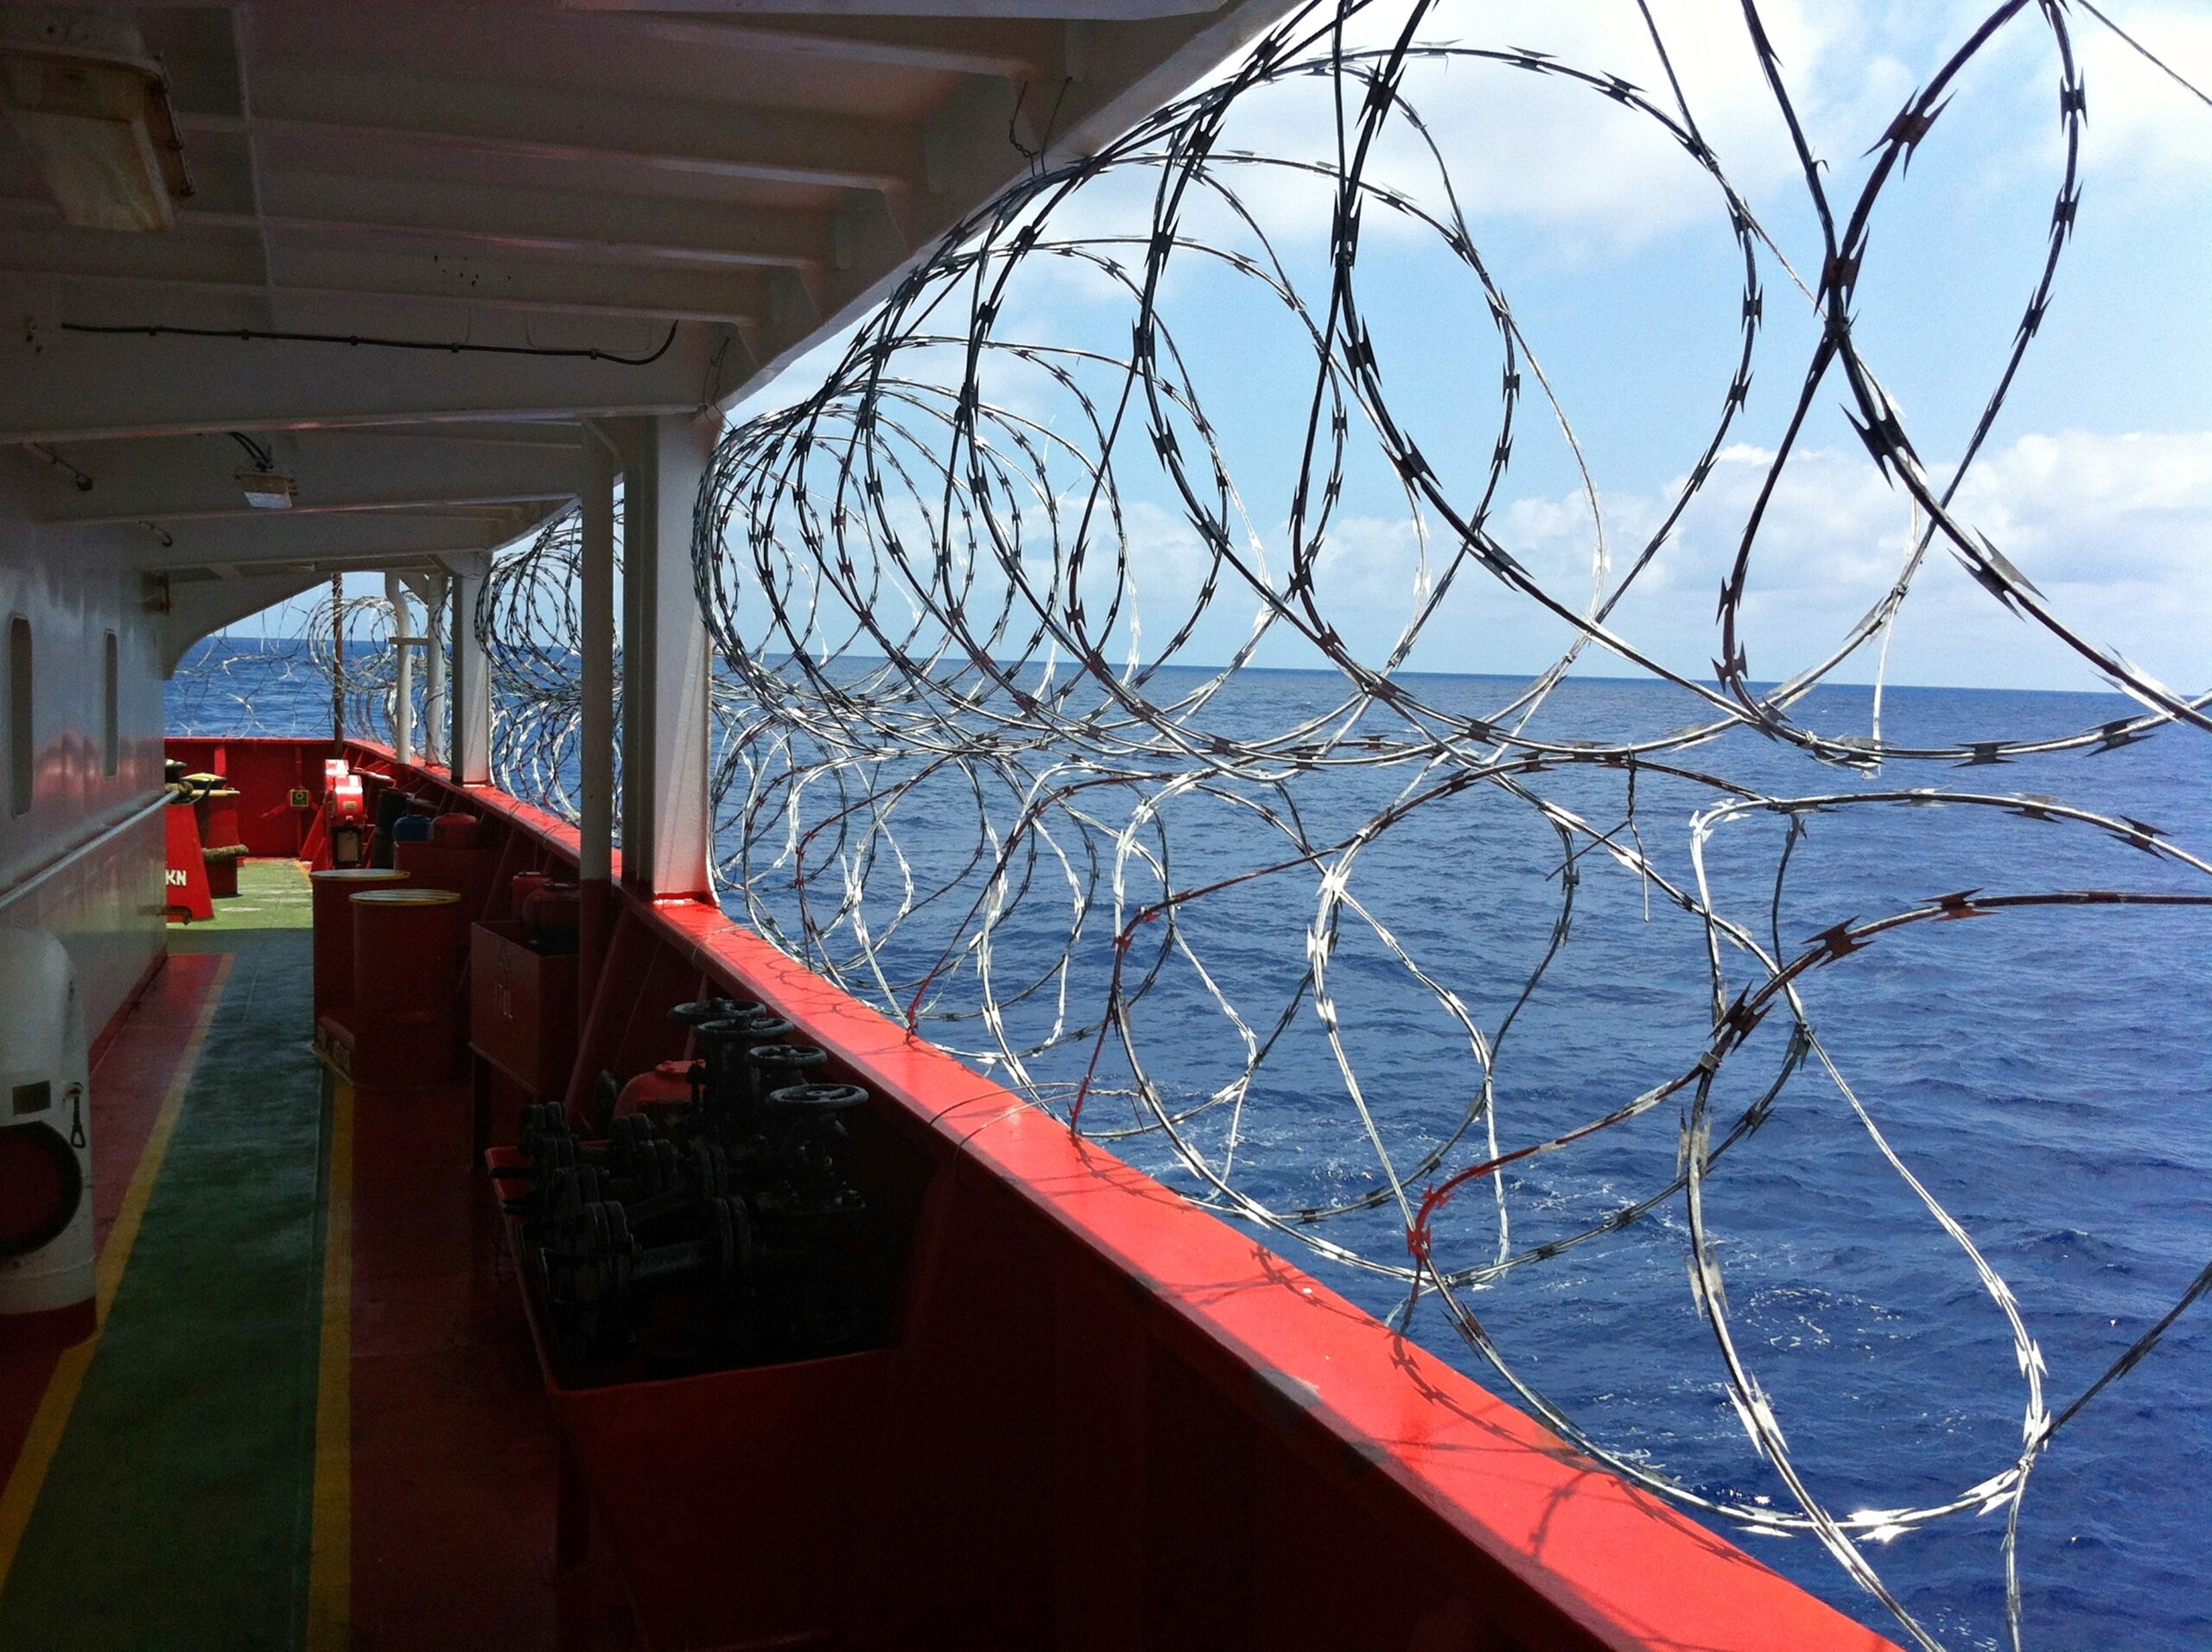 Barbed wire is twisted on board the tanker to protect against pirate attacks when sailing in dangerous areas of the seas